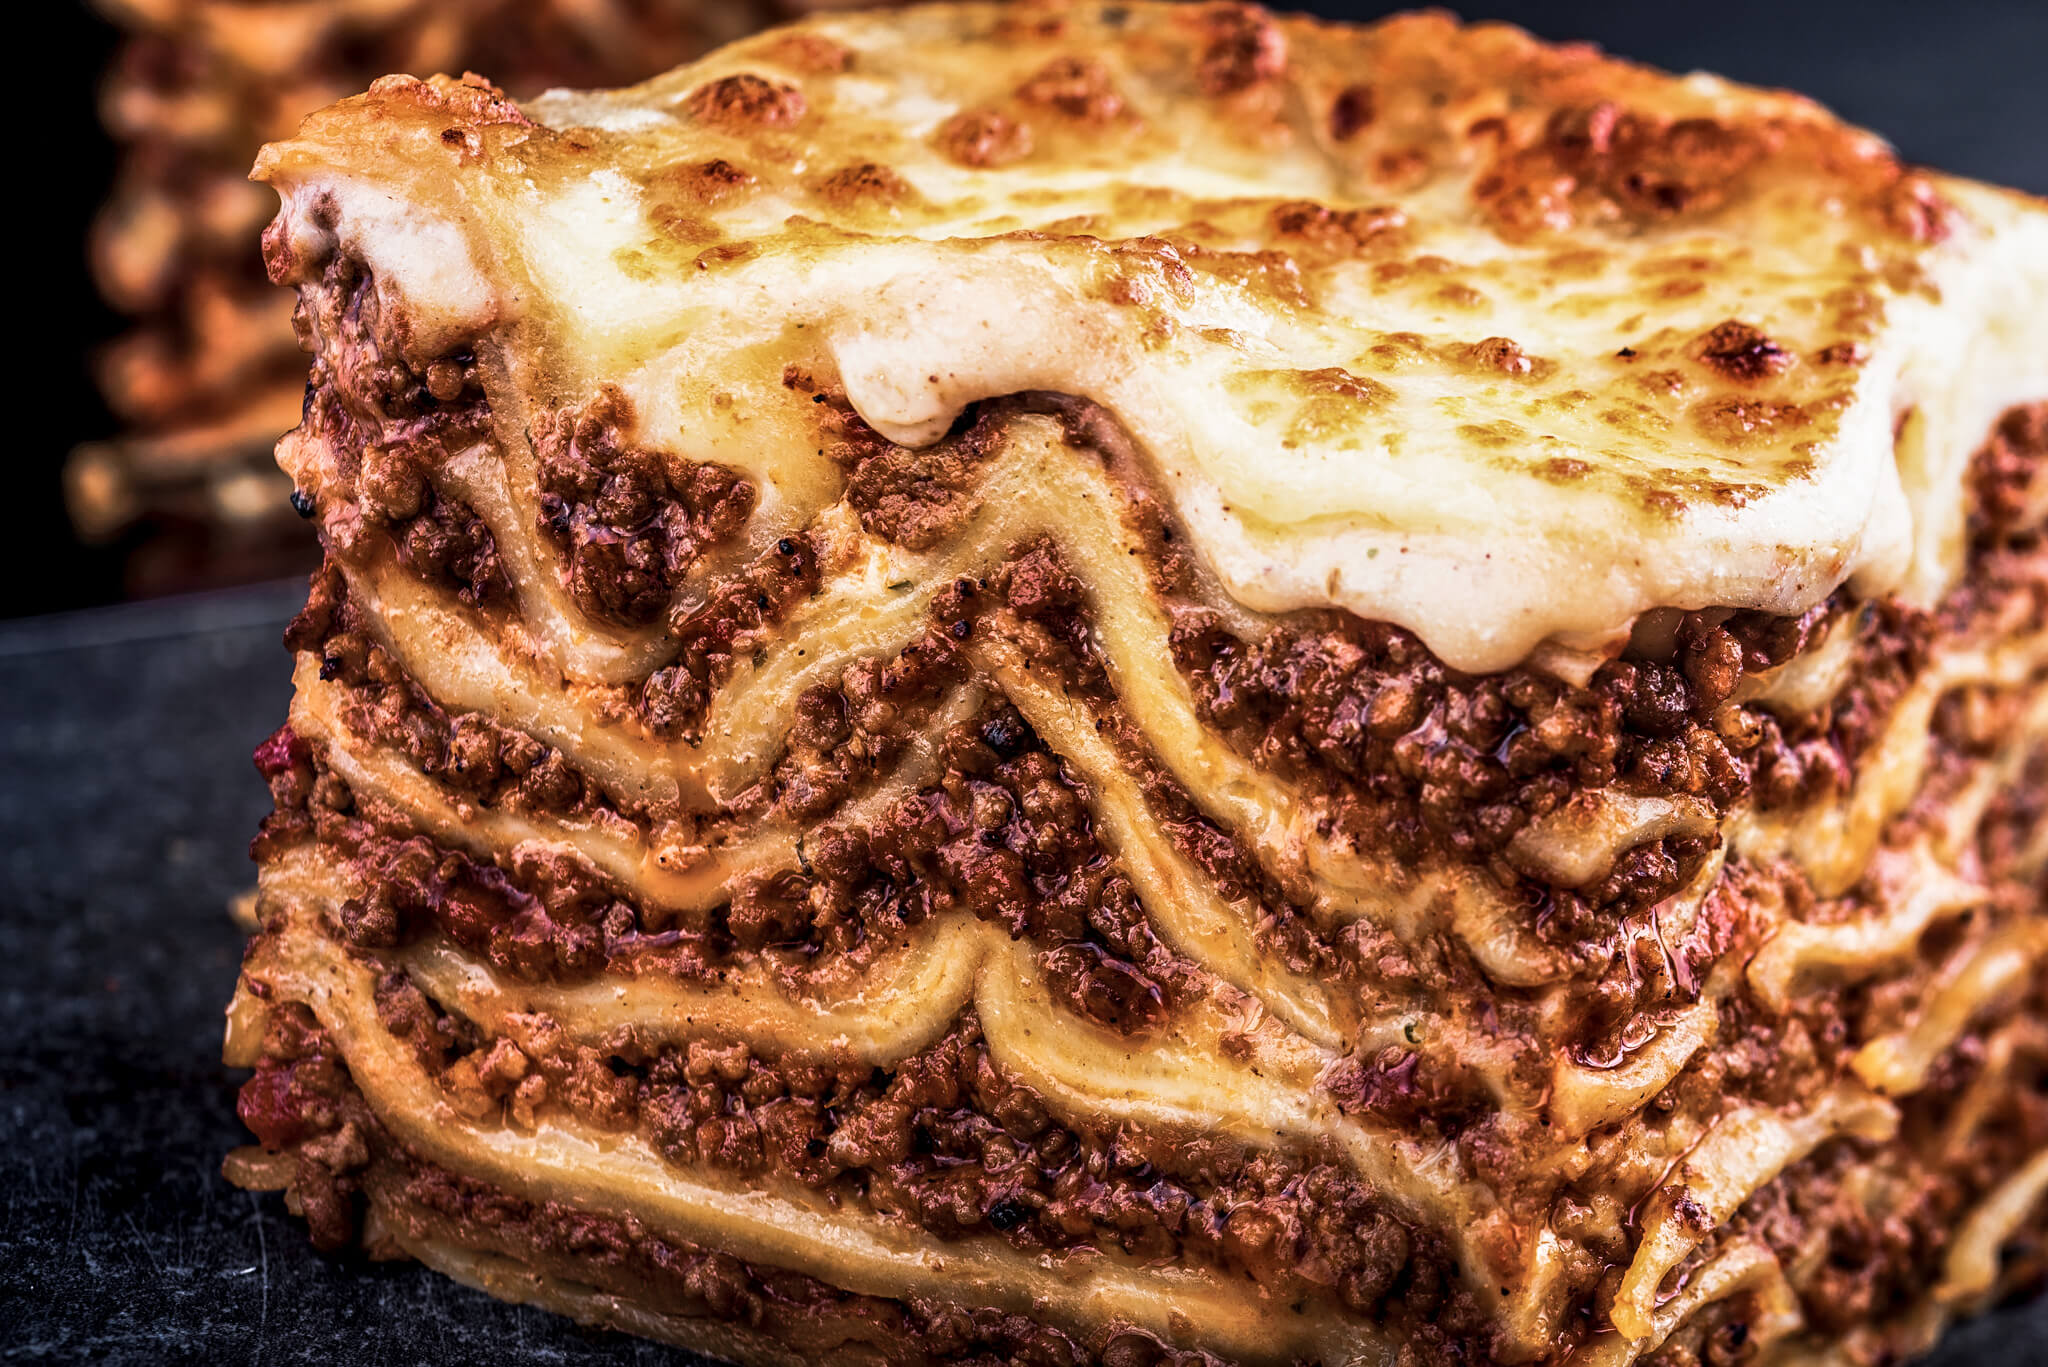 A lasagne is also very umami rich